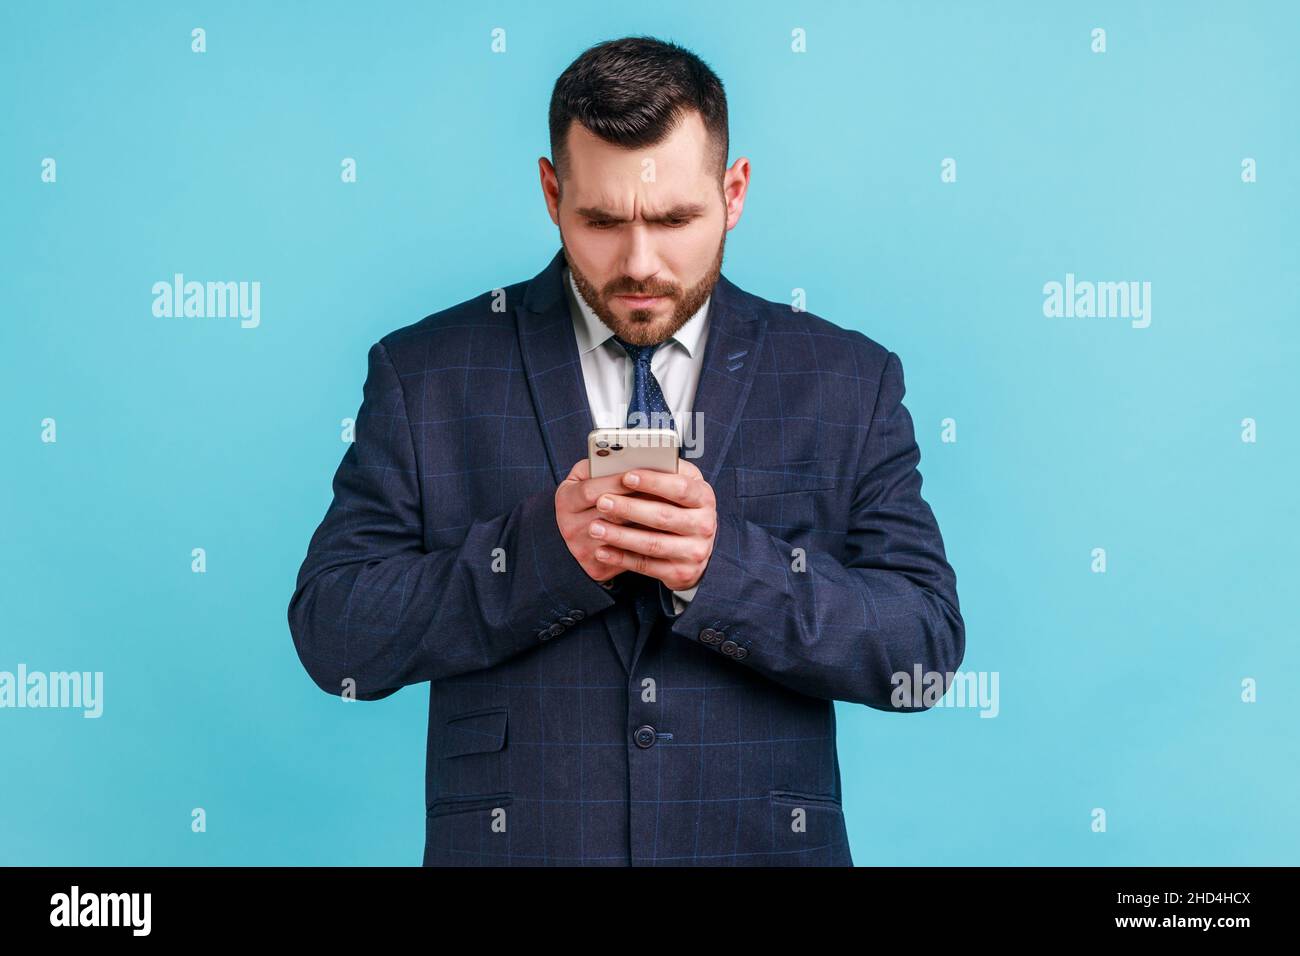 Serious bearded man wearing official style suit texting message in social media on cell phone, using mobile network services, chatting online. Indoor studio shot isolated on blue background. Stock Photo